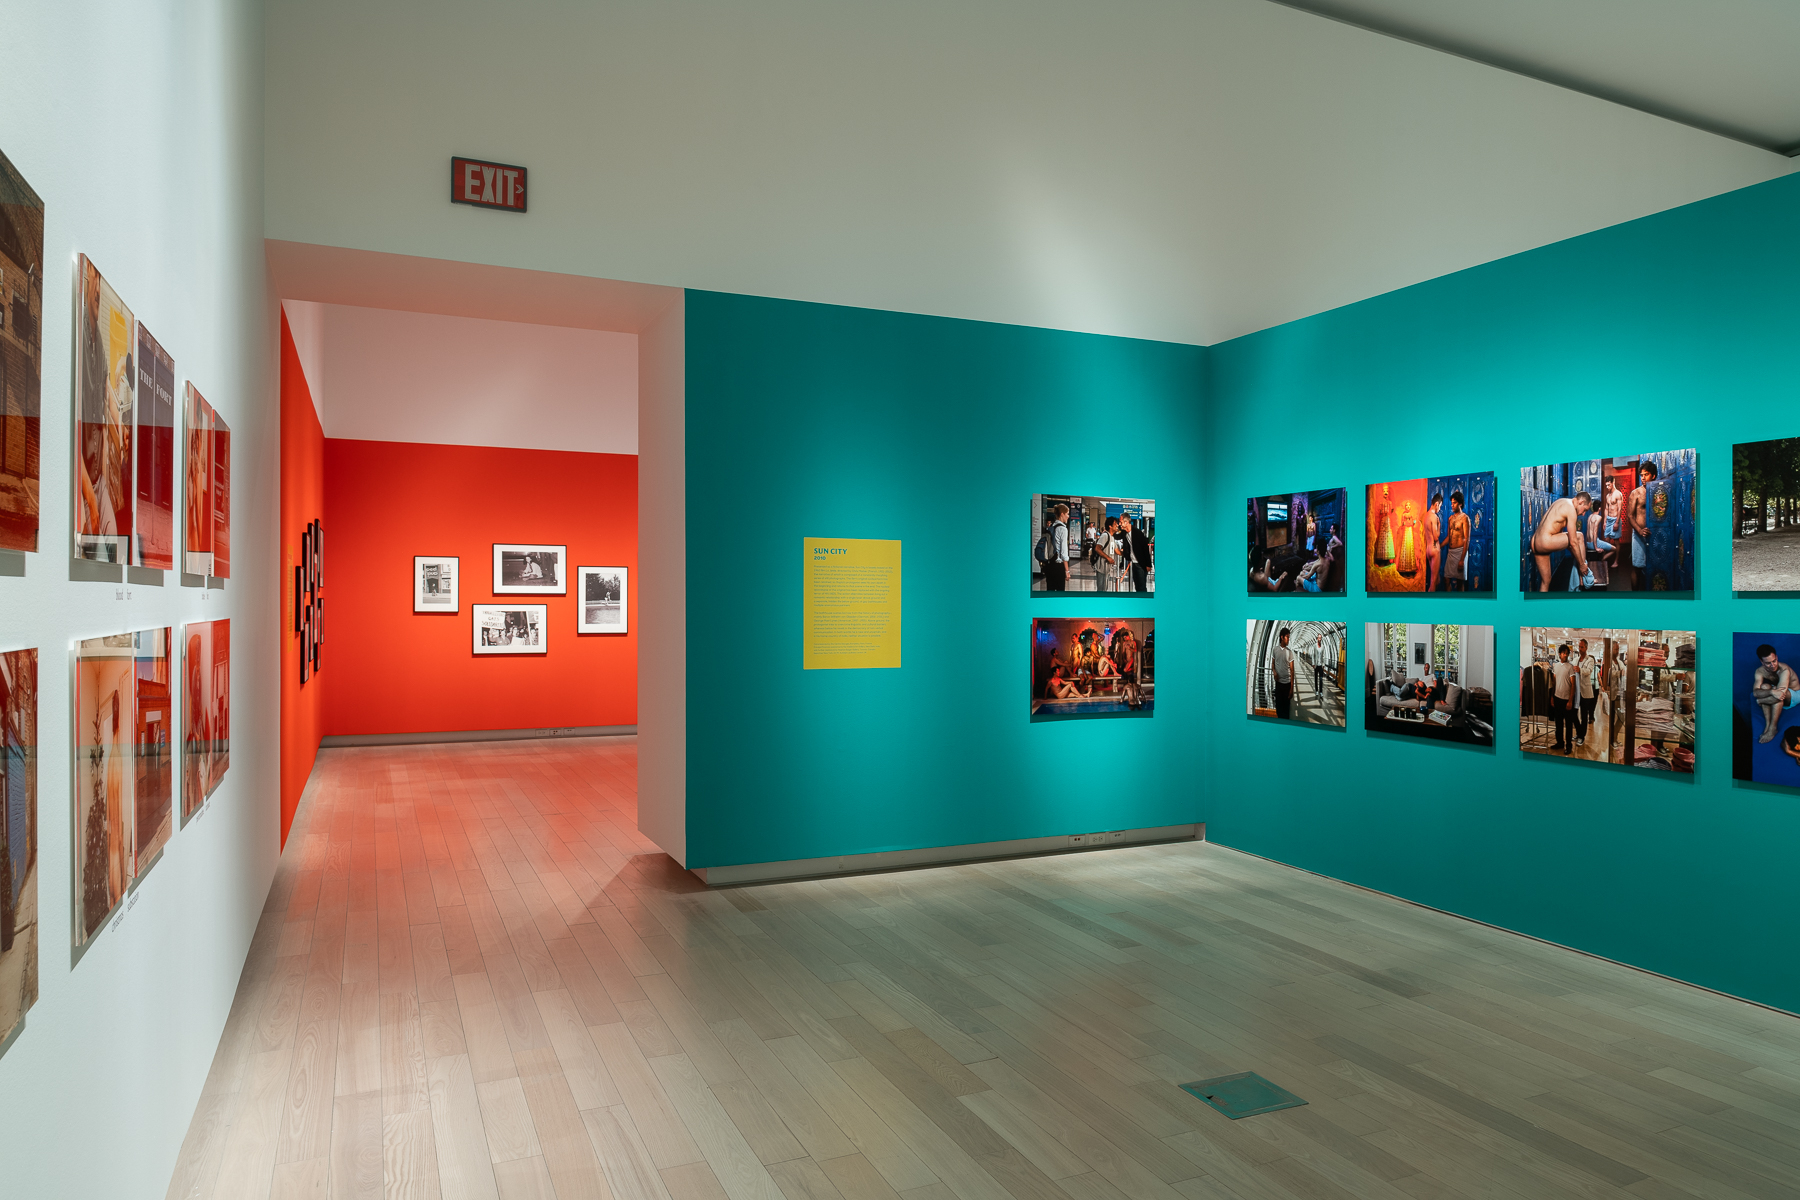     Sunil Gupta, From Here to Eternity: Sunil Gupta, A Retrospective, installation view, Ryerson Image Centre Gallery, 2022. Courtesy of the artist and the RIC

